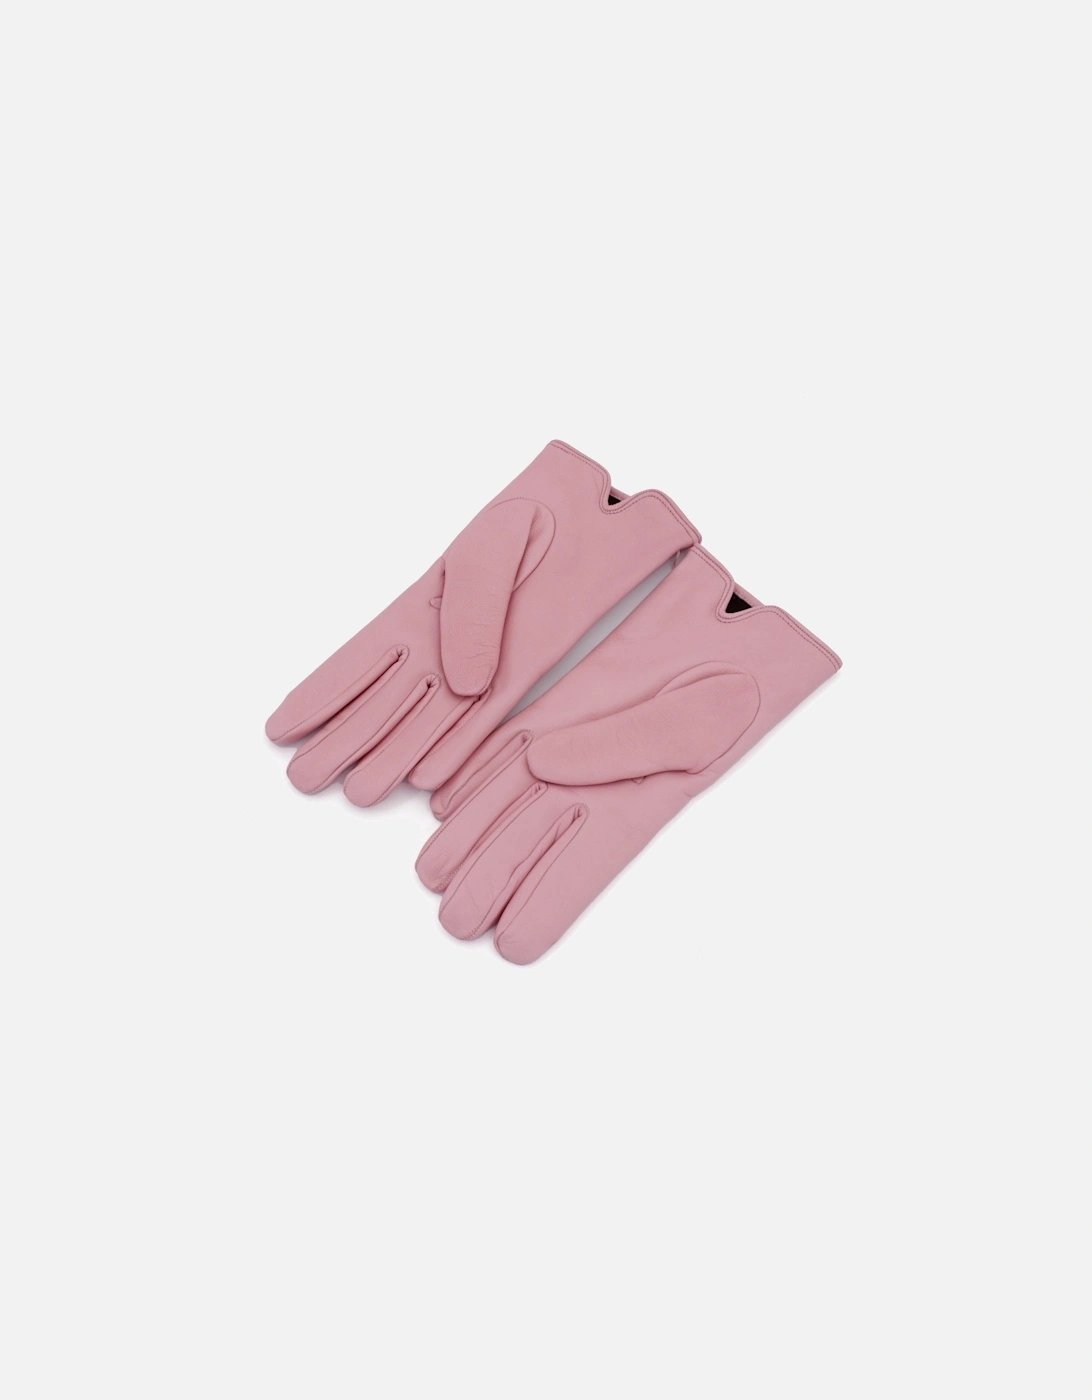 Silver Orb Classic Gloves Pink